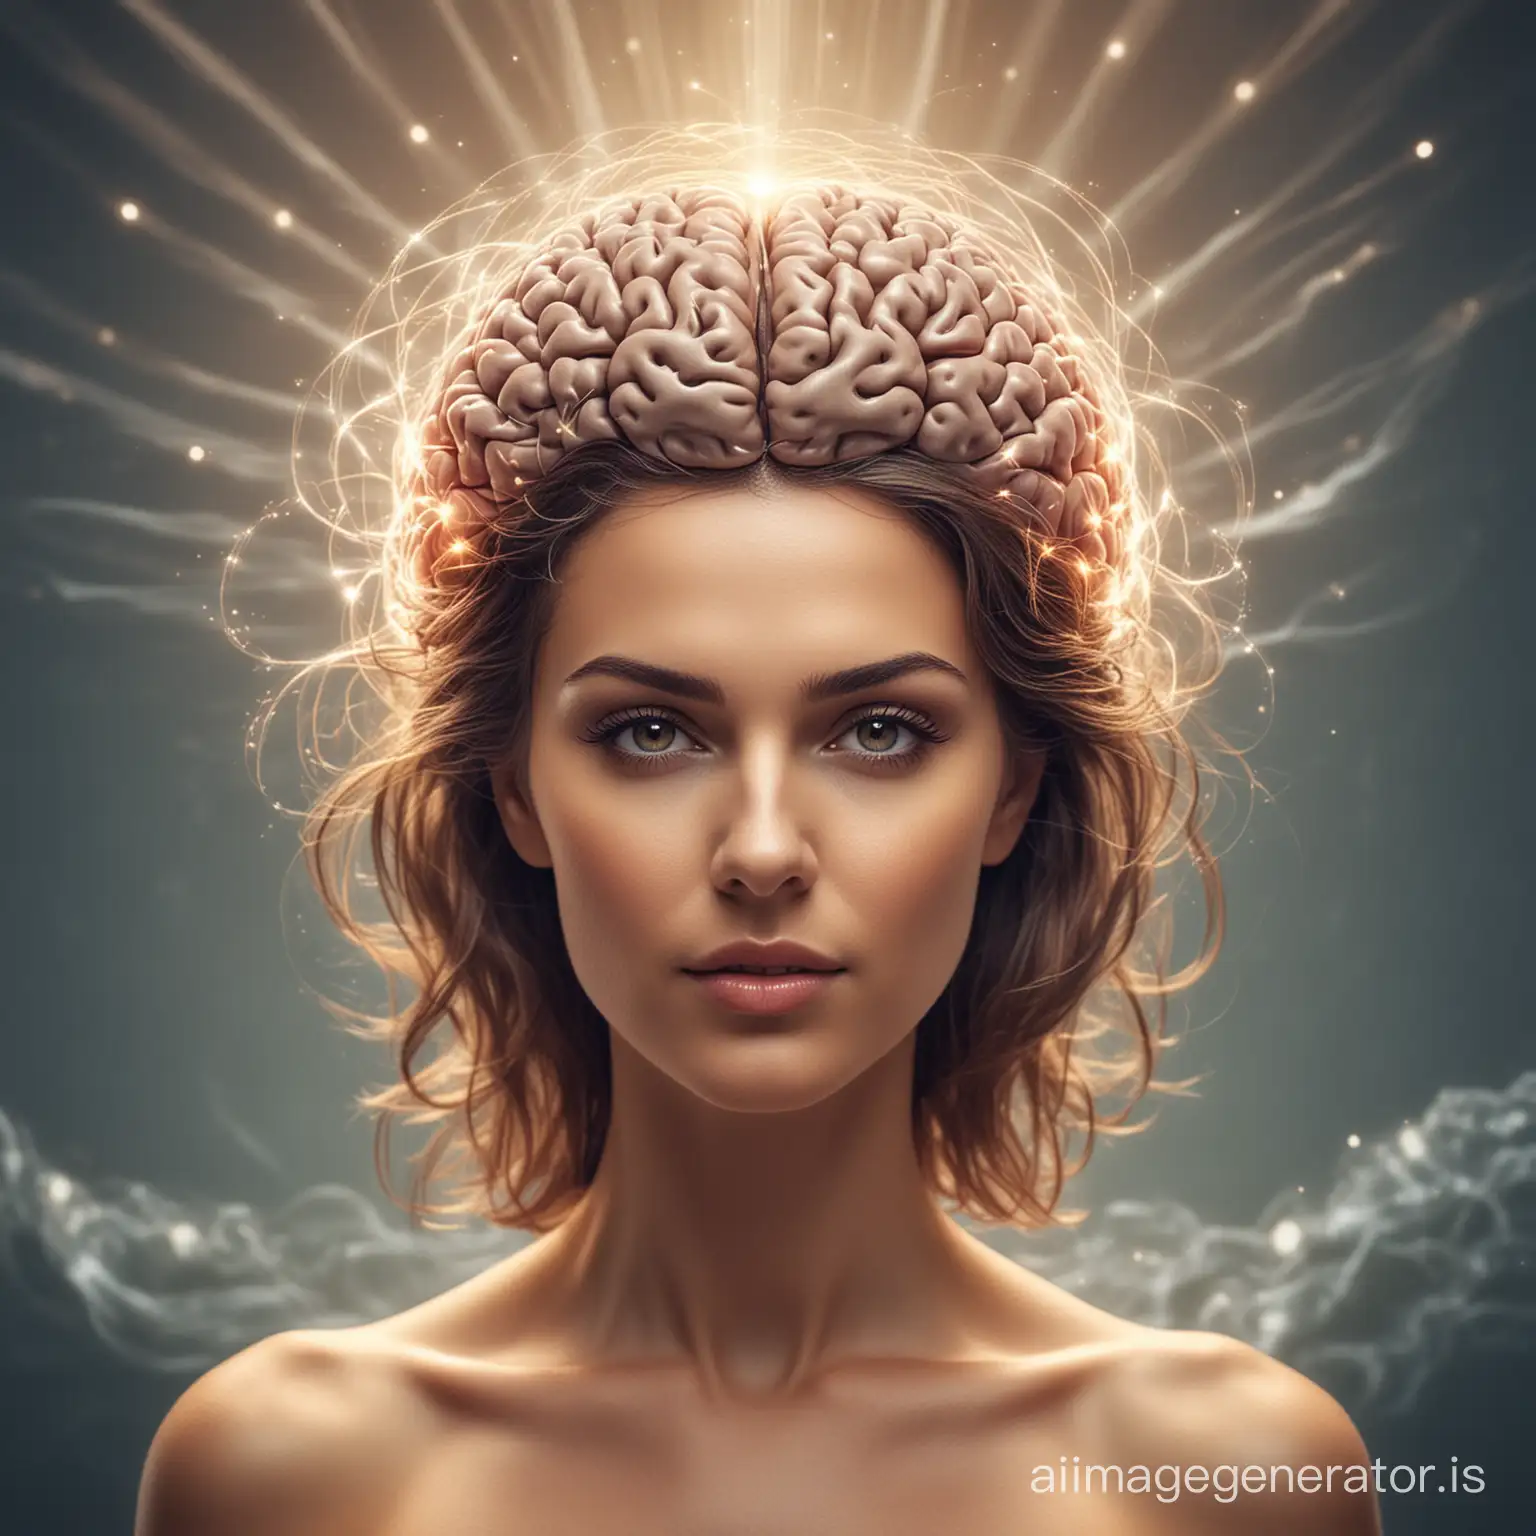 Female brain surrounded by waves of light, symbolizing creativity and innovation funcyioning 
brain

